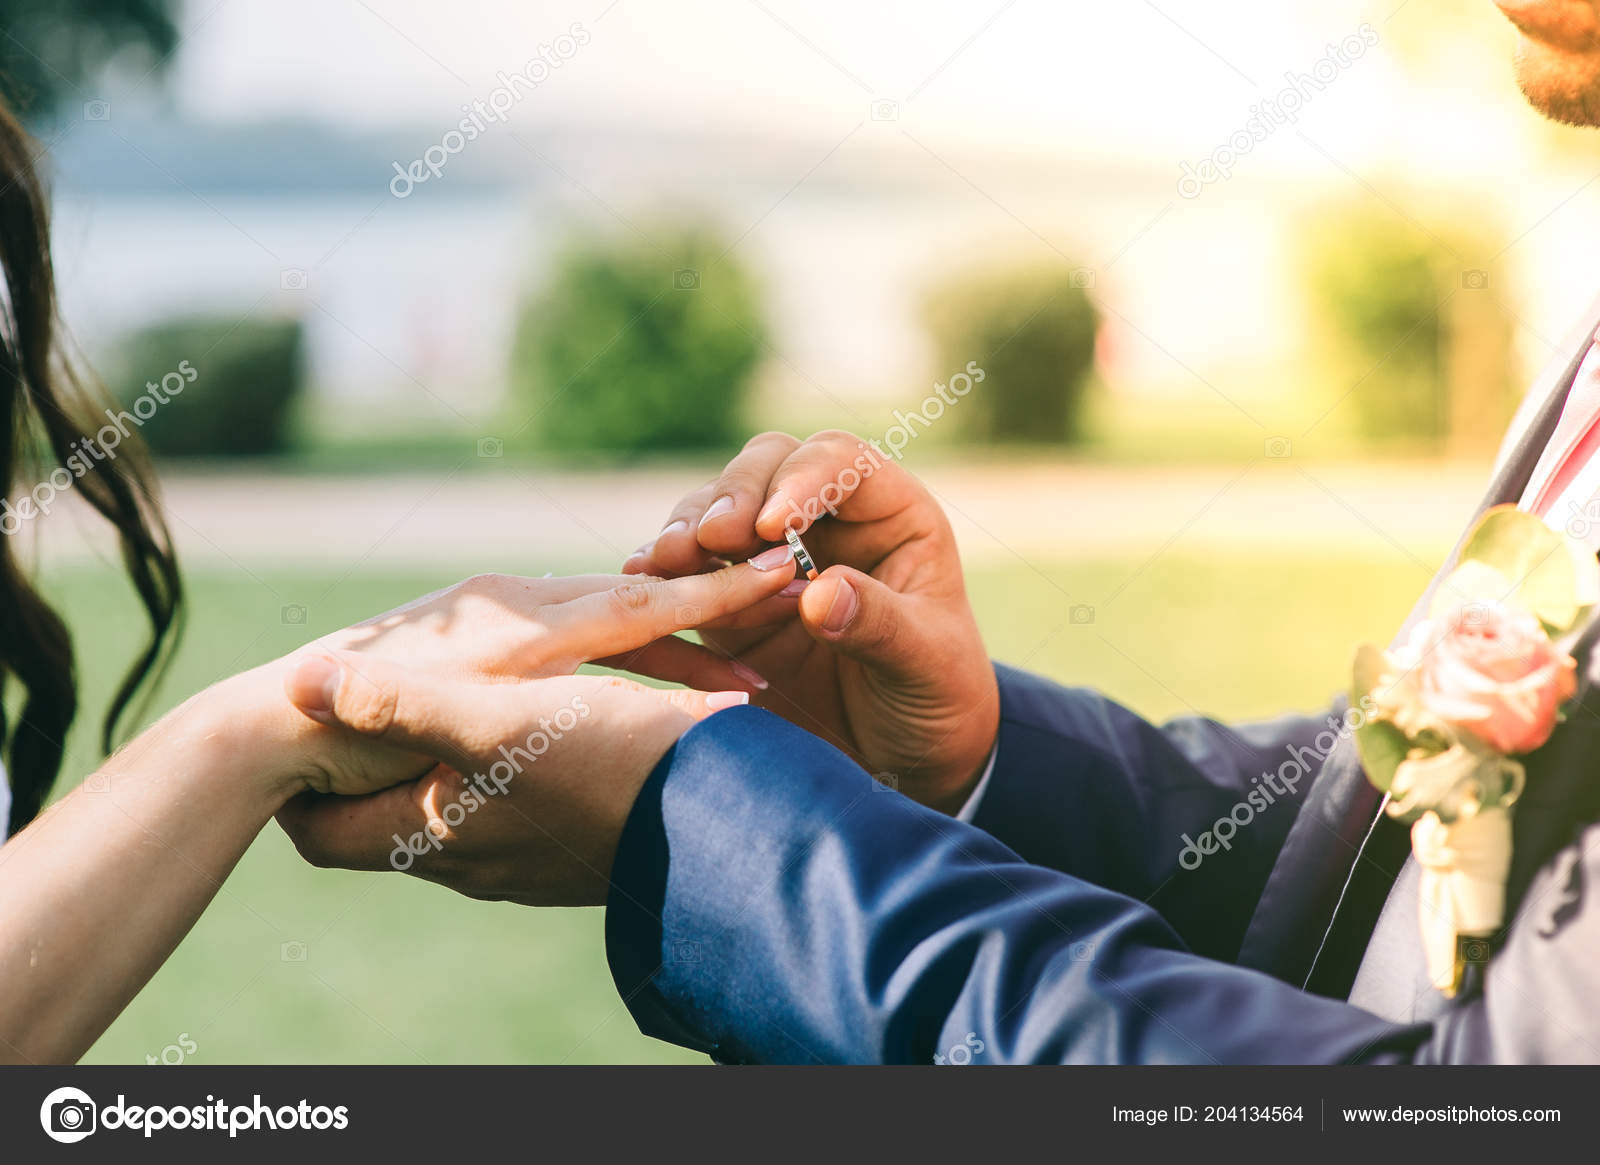 Free Images : hand, man, woman, male, finger, black, arm, bride, groom,  holding hands, wedding ring, ceremony, wife, photograph, connect, husband,  sense, vow 1920x1280 - - 947461 - Free stock photos - PxHere